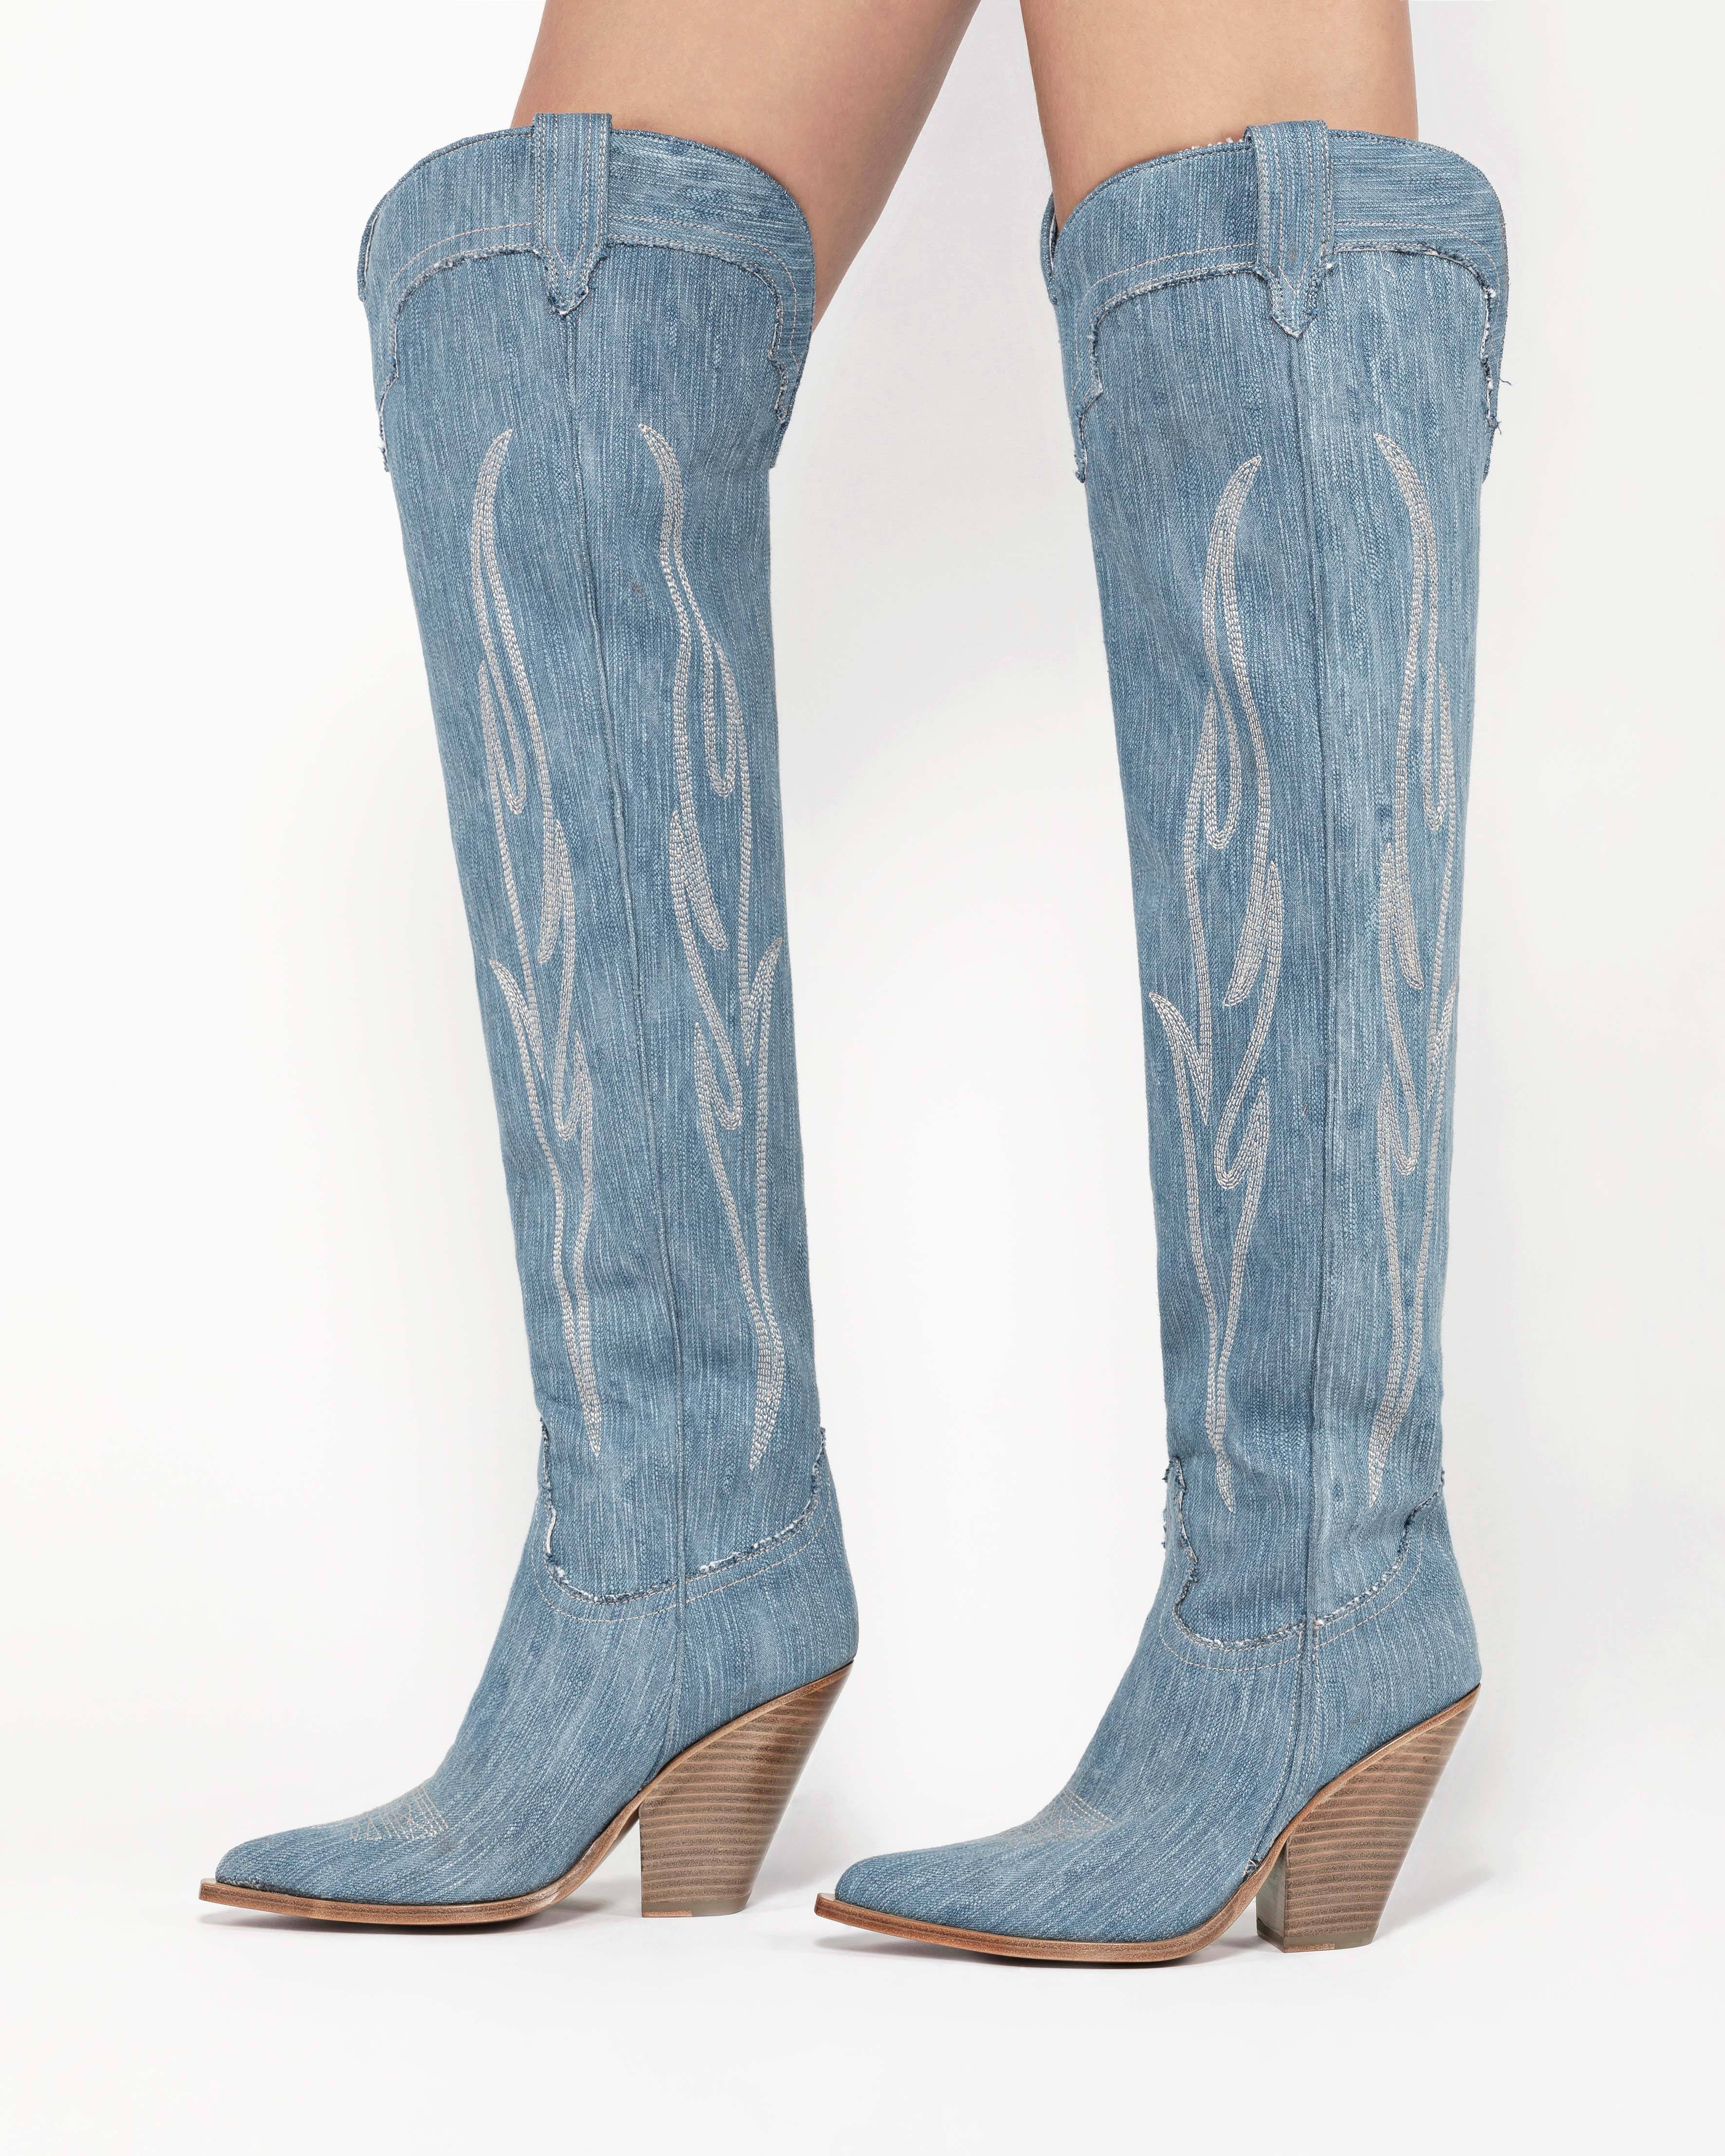 HERMOSA Women's Over The Knee Boots in Light Blue Jeans | Off-White Embroidery_Indossato_02